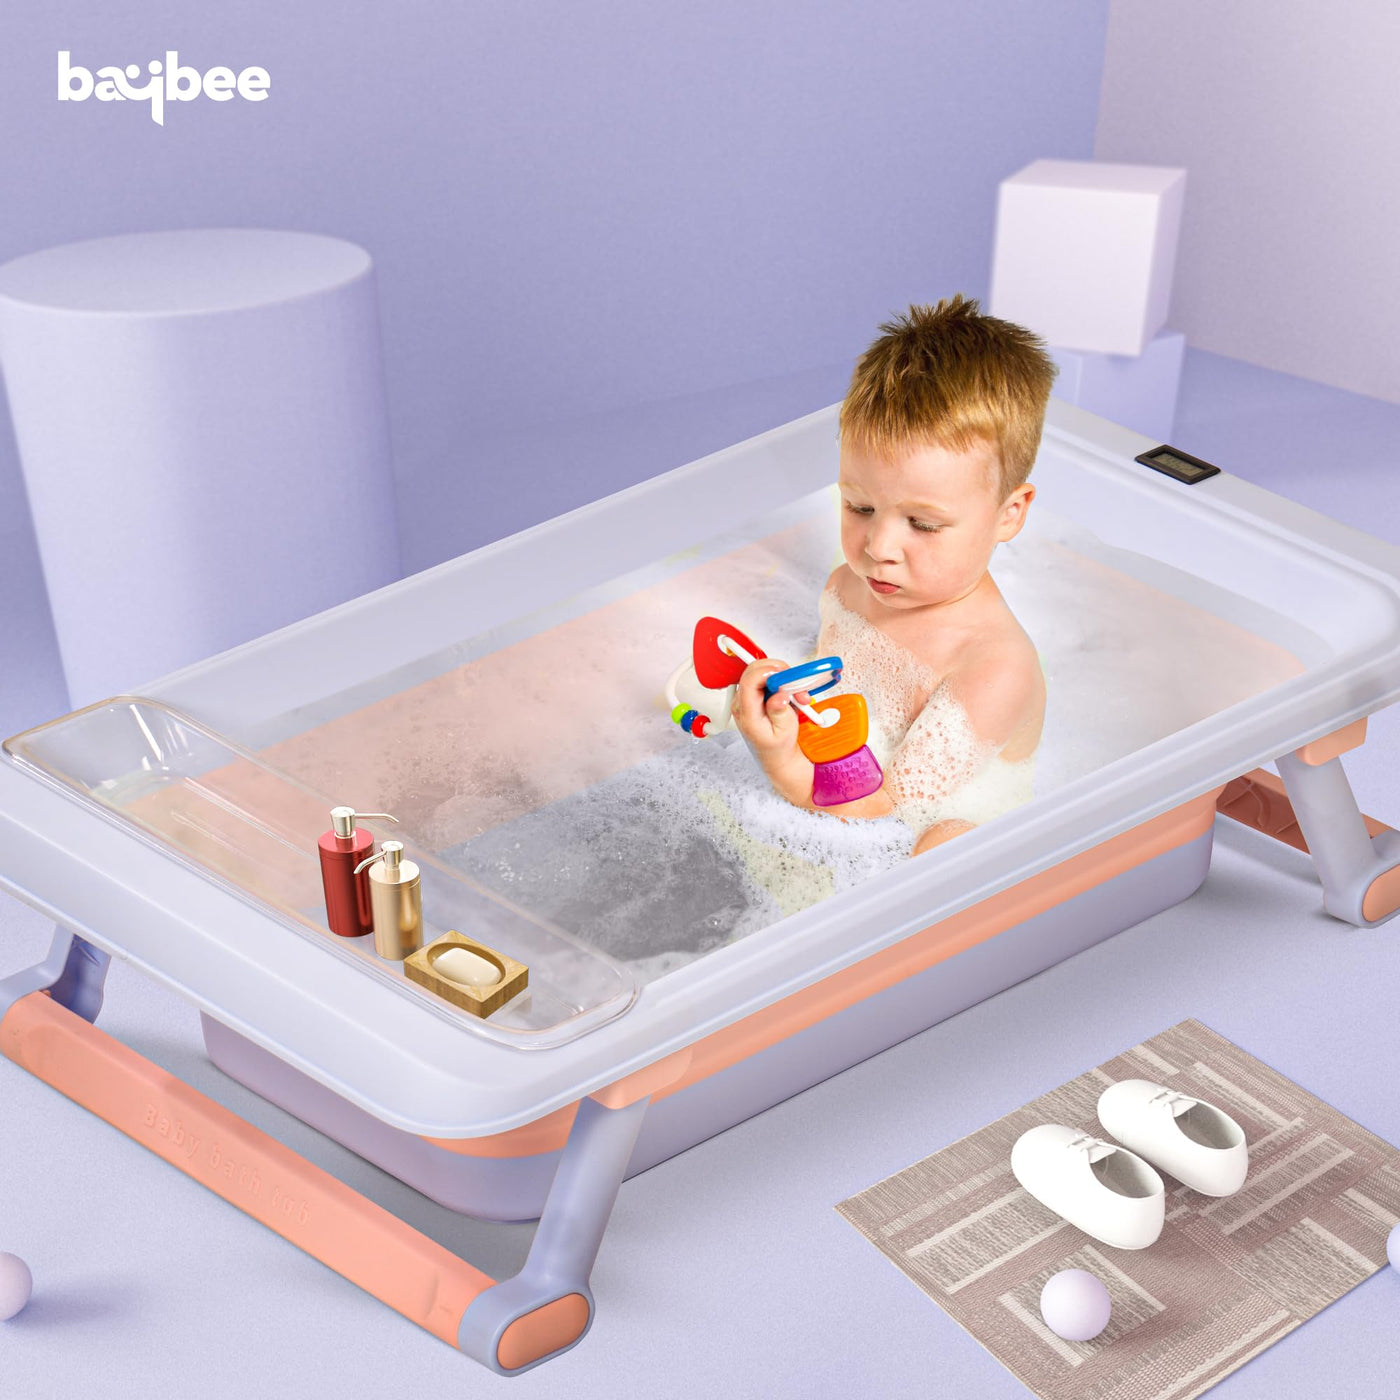 Baby Inflatable Bathtub with Air Pump - Portable Travel Toddler Bathing Tub  - Kids Foldable Shower Tub for Girl and Boy, Mini Air Swimming Pool